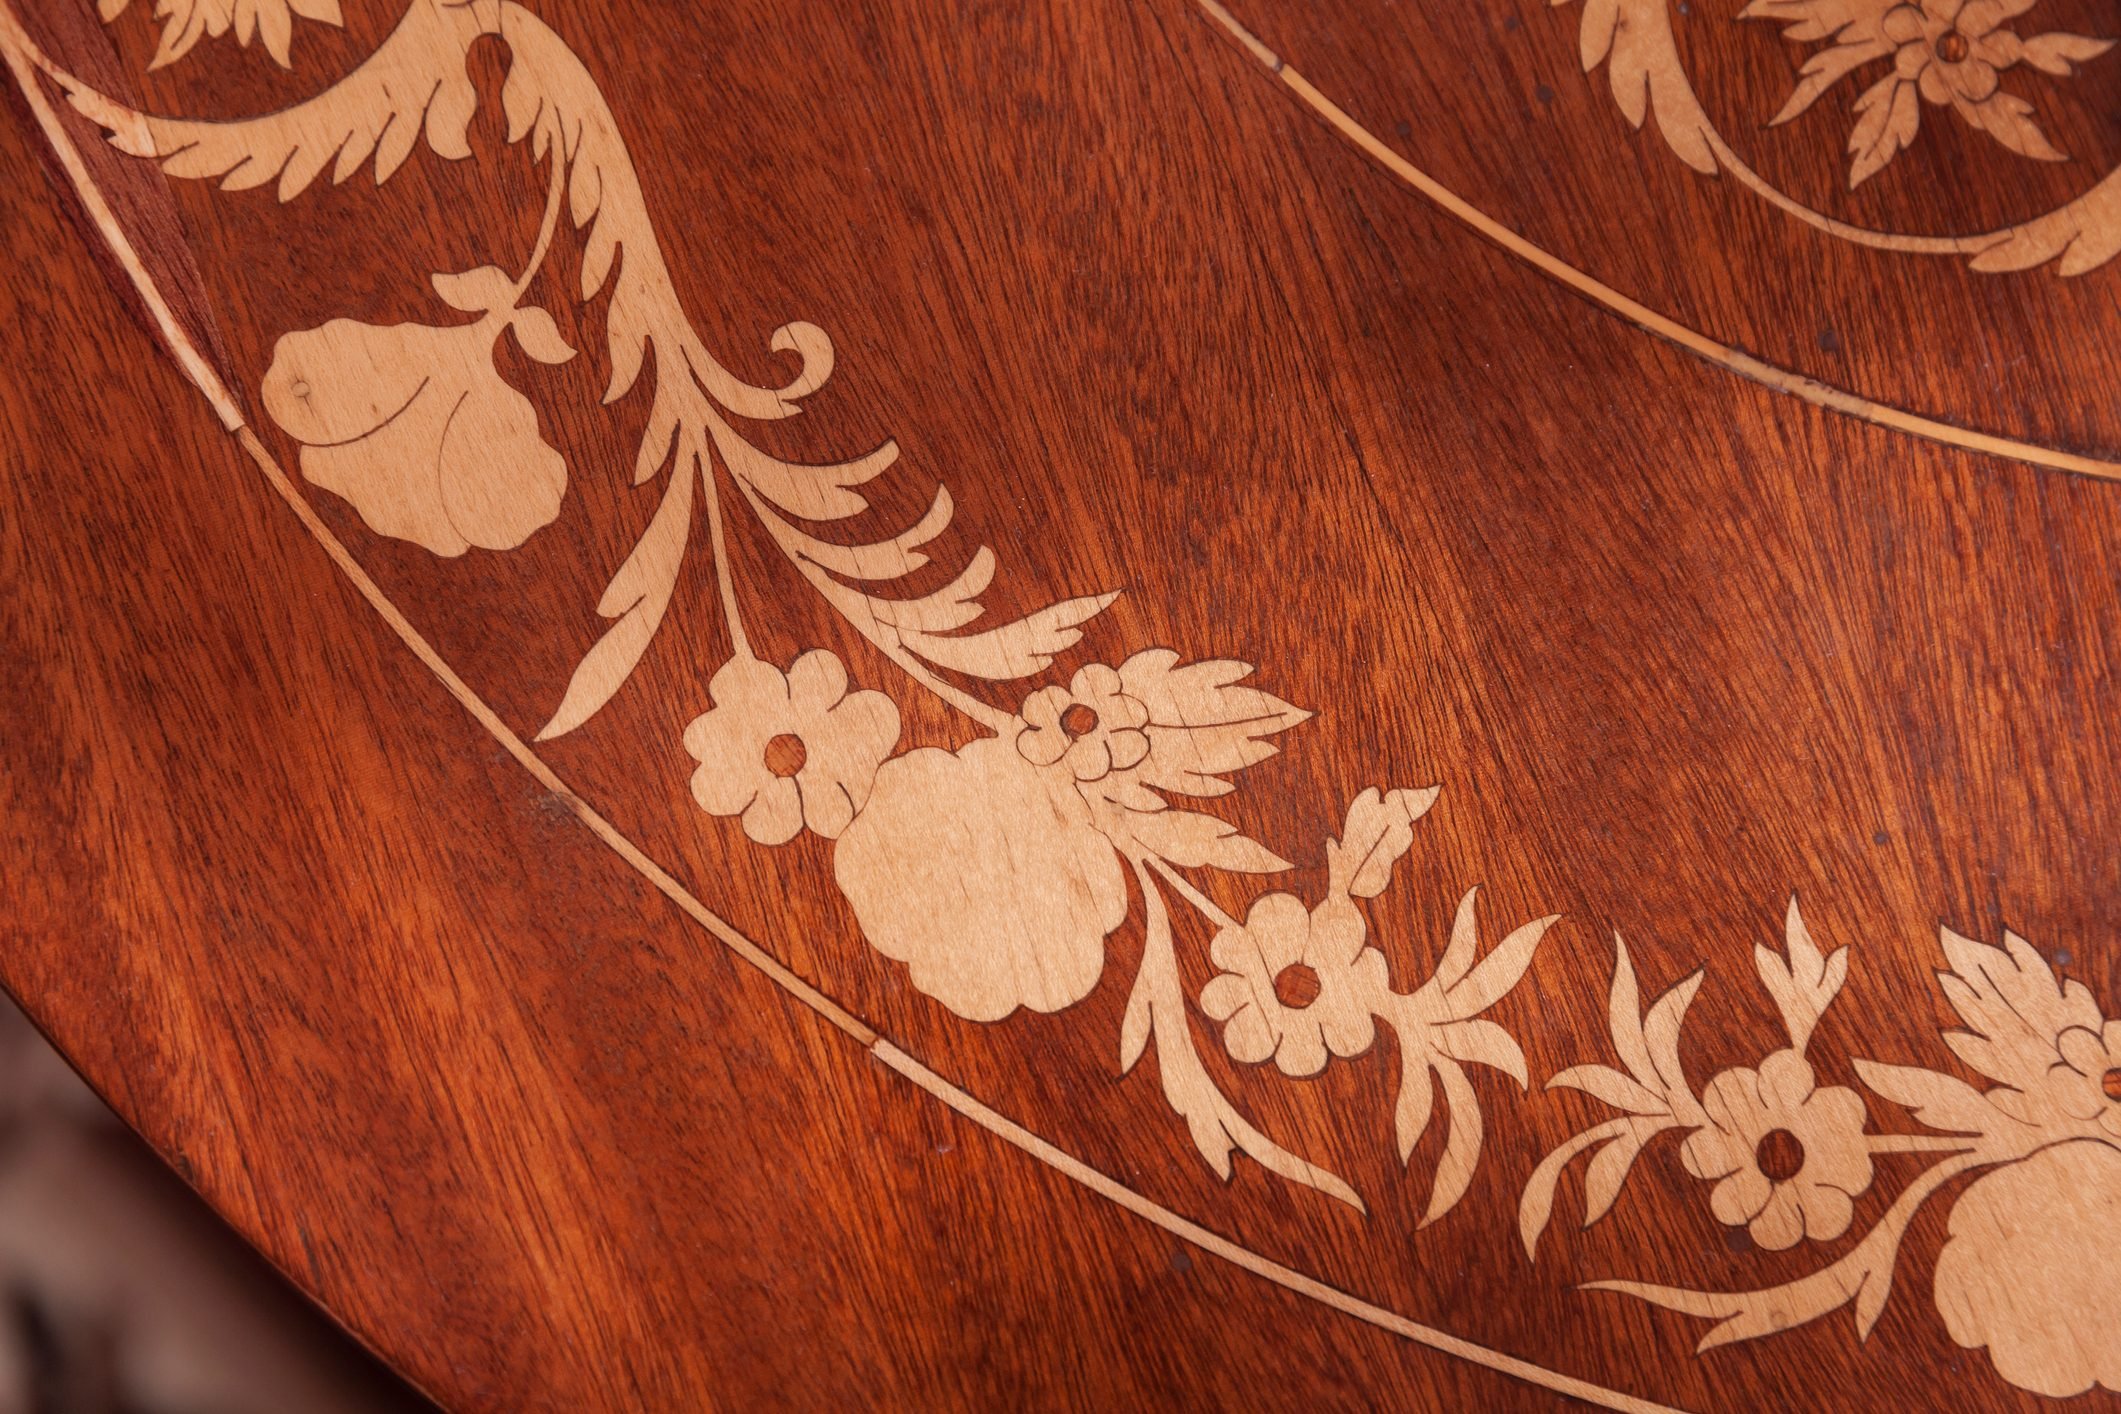 Decorative inlay carving on a wooden table